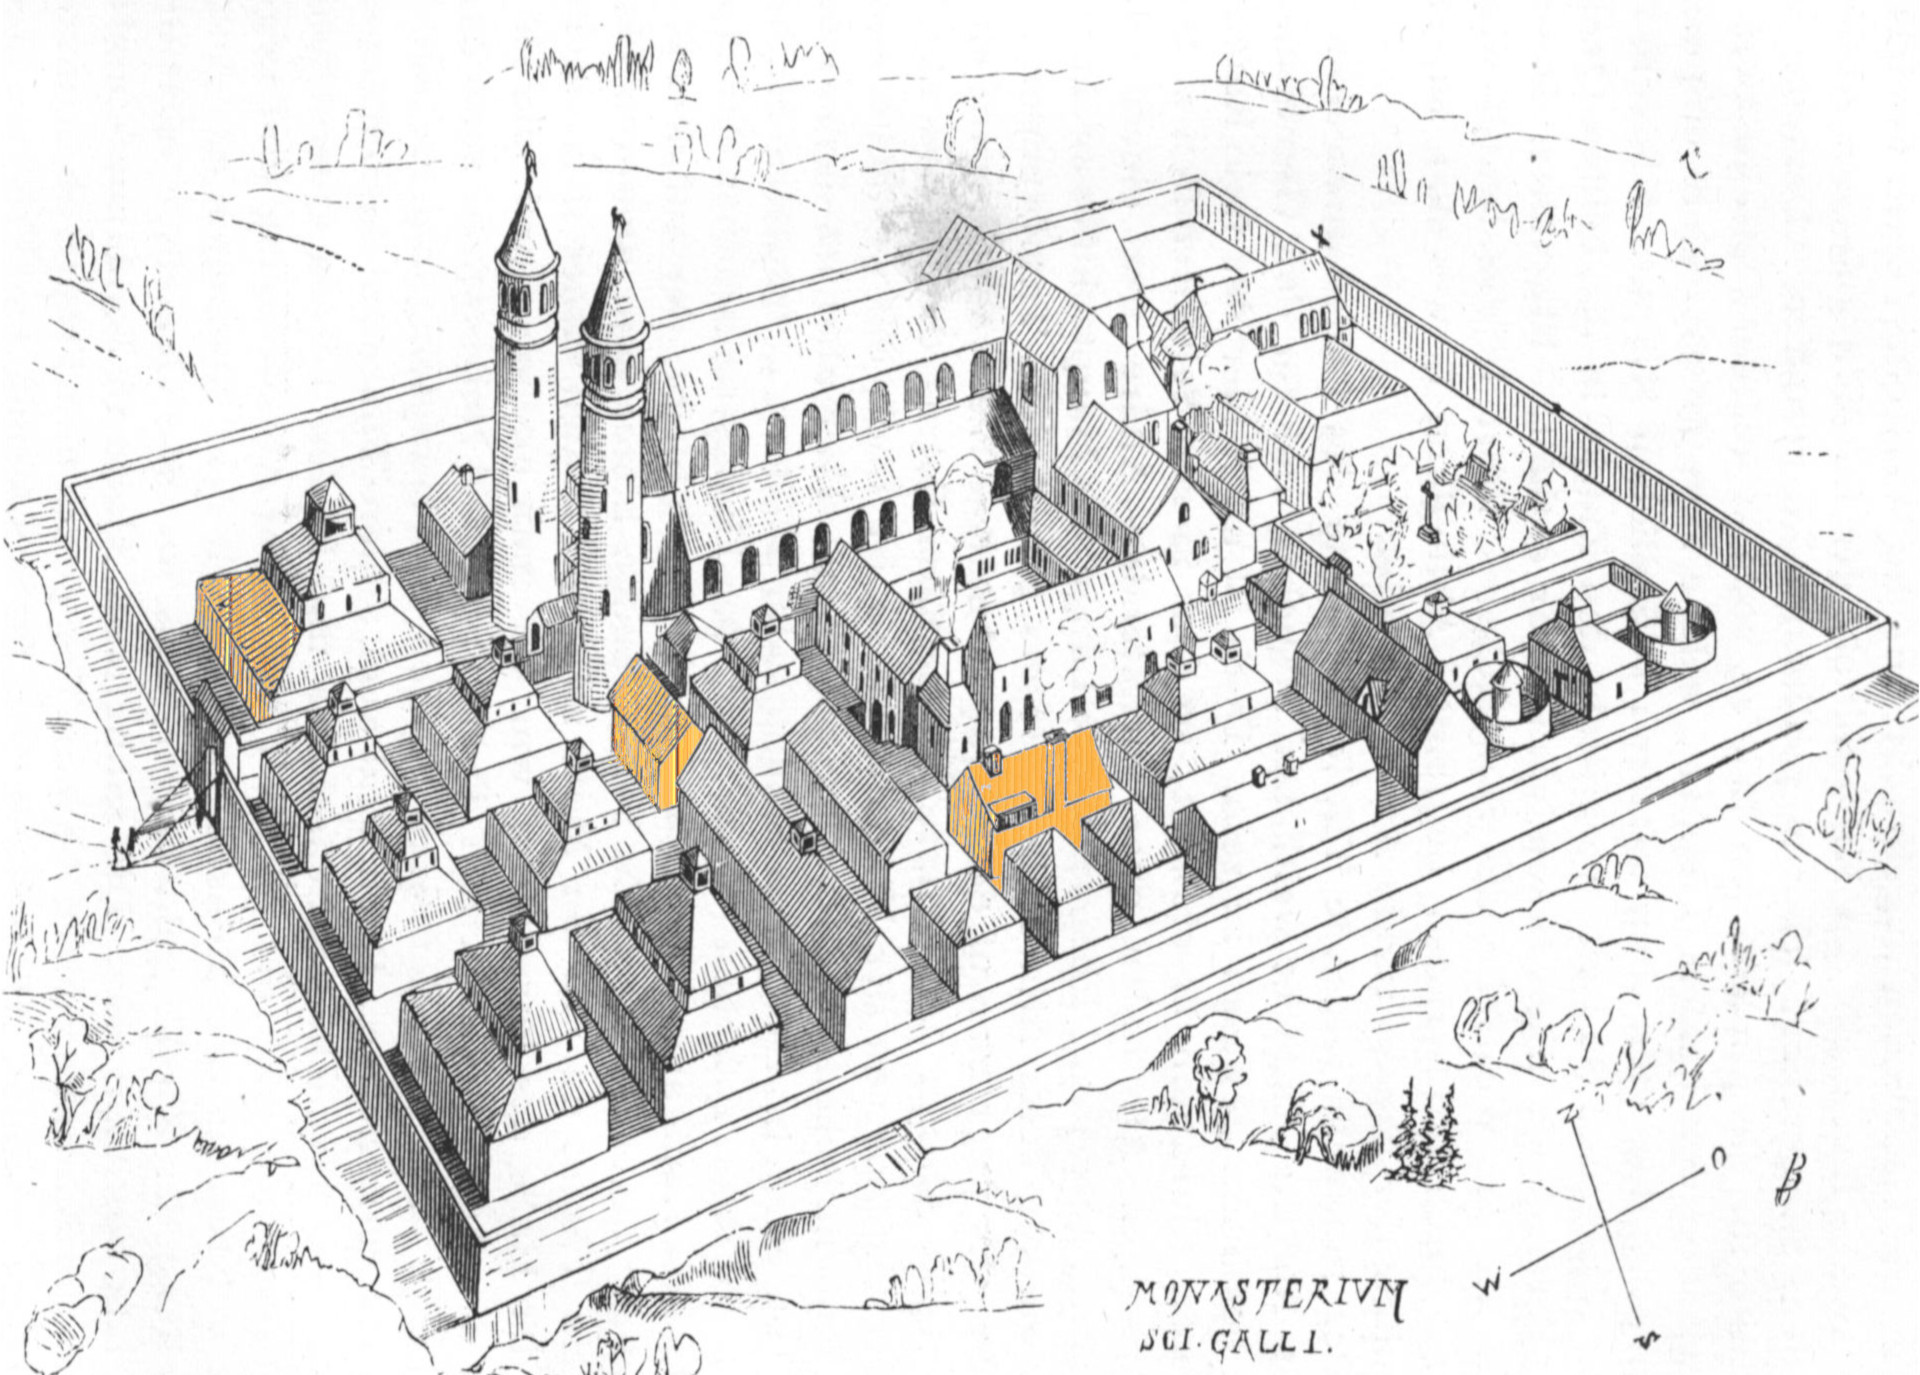 Plan of the abbey of St Gall drawn around 820 with its 3 breweries.